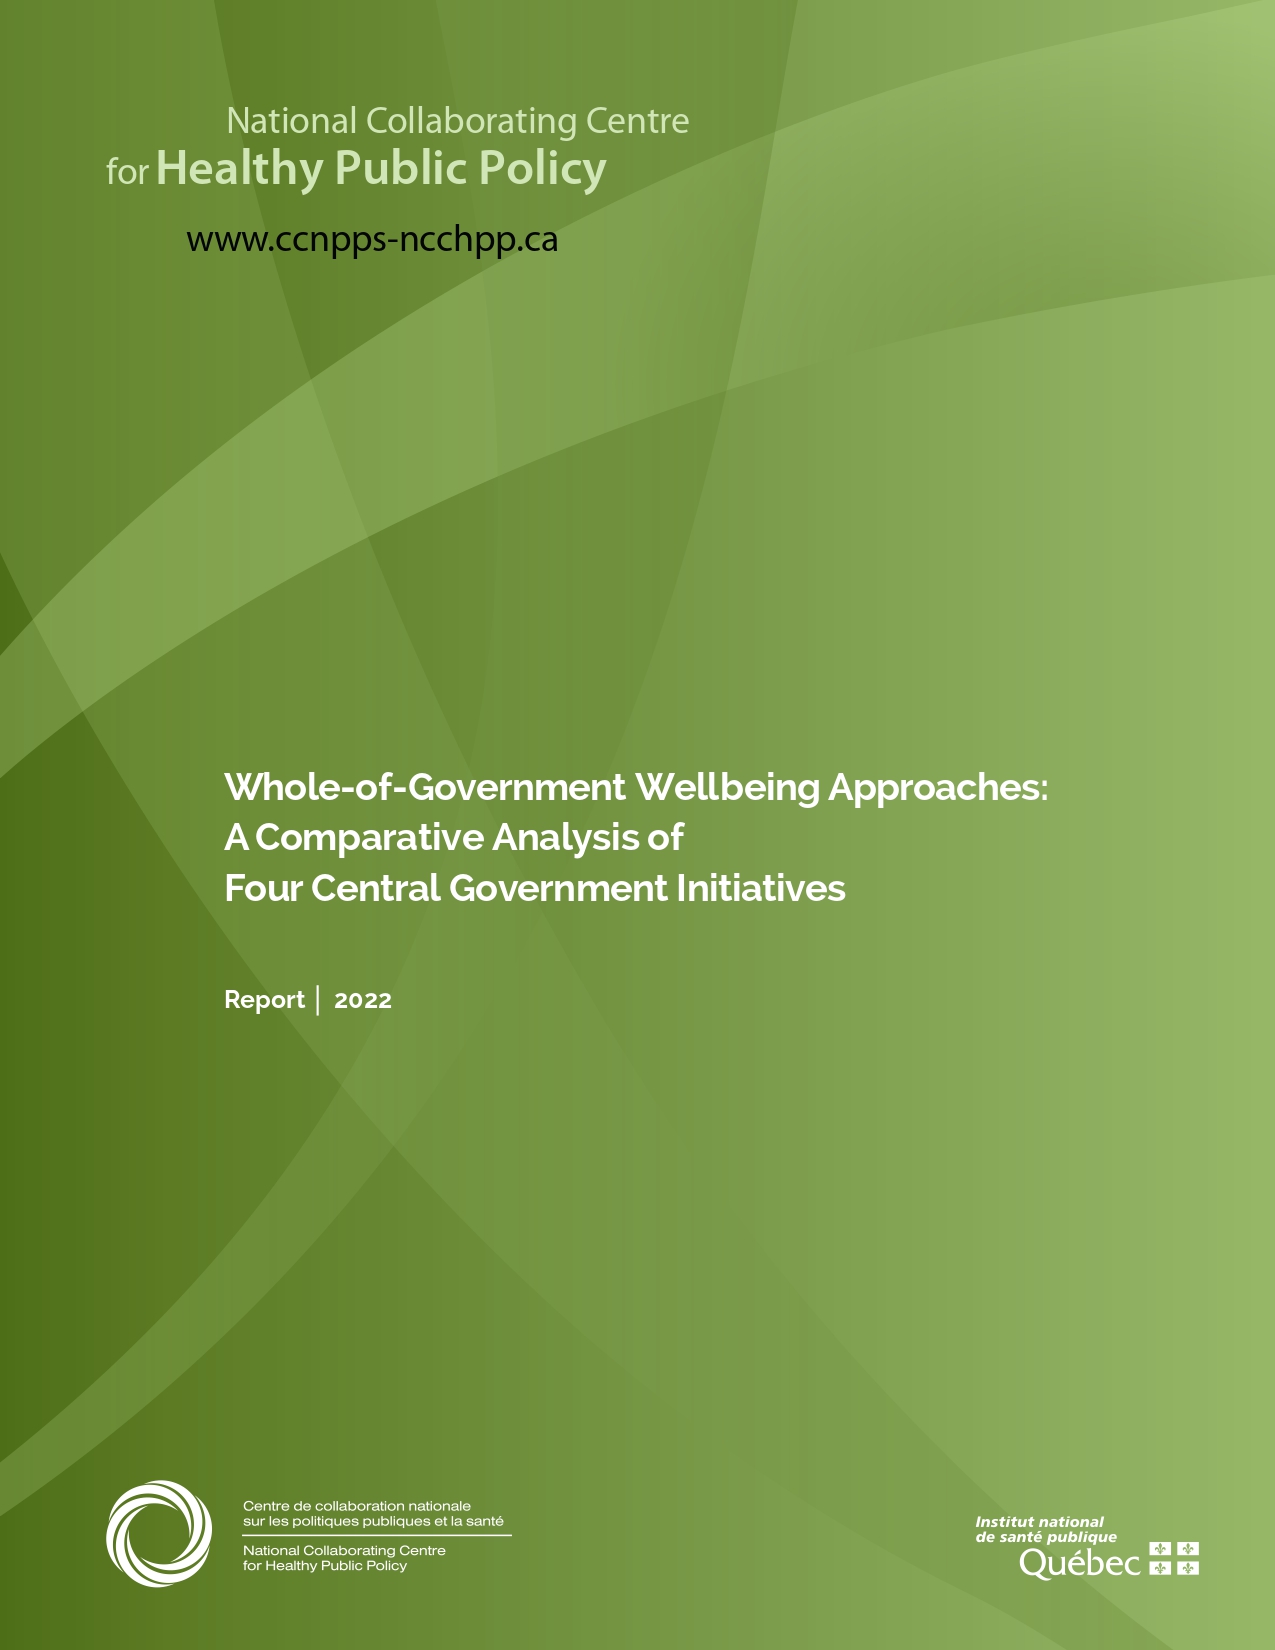 Whole-of-Government Wellbeing Approaches: A Comparative Analysis of Four Central Government Initiatives